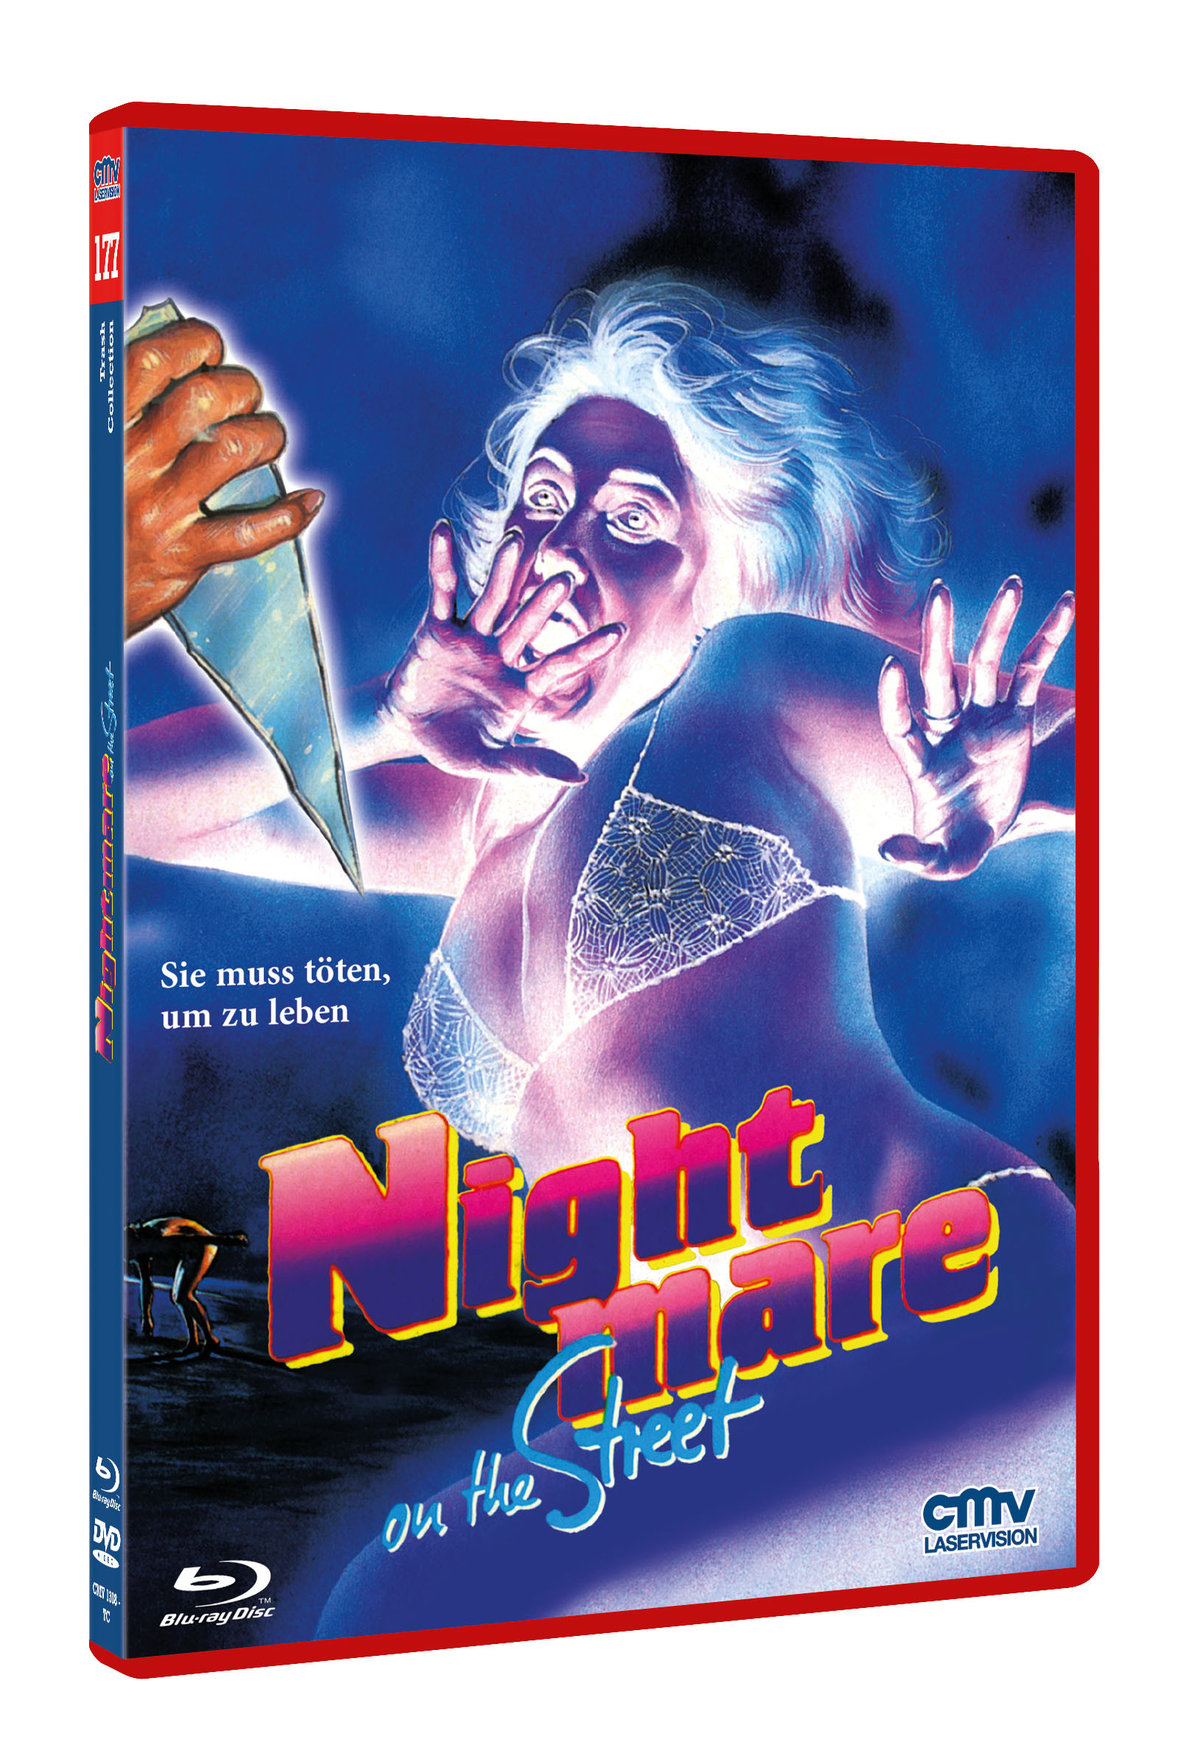 Nightmare on the Street (Nightmares) - The NEW! Trash Collection No. 21  (DVD+blu-ray)